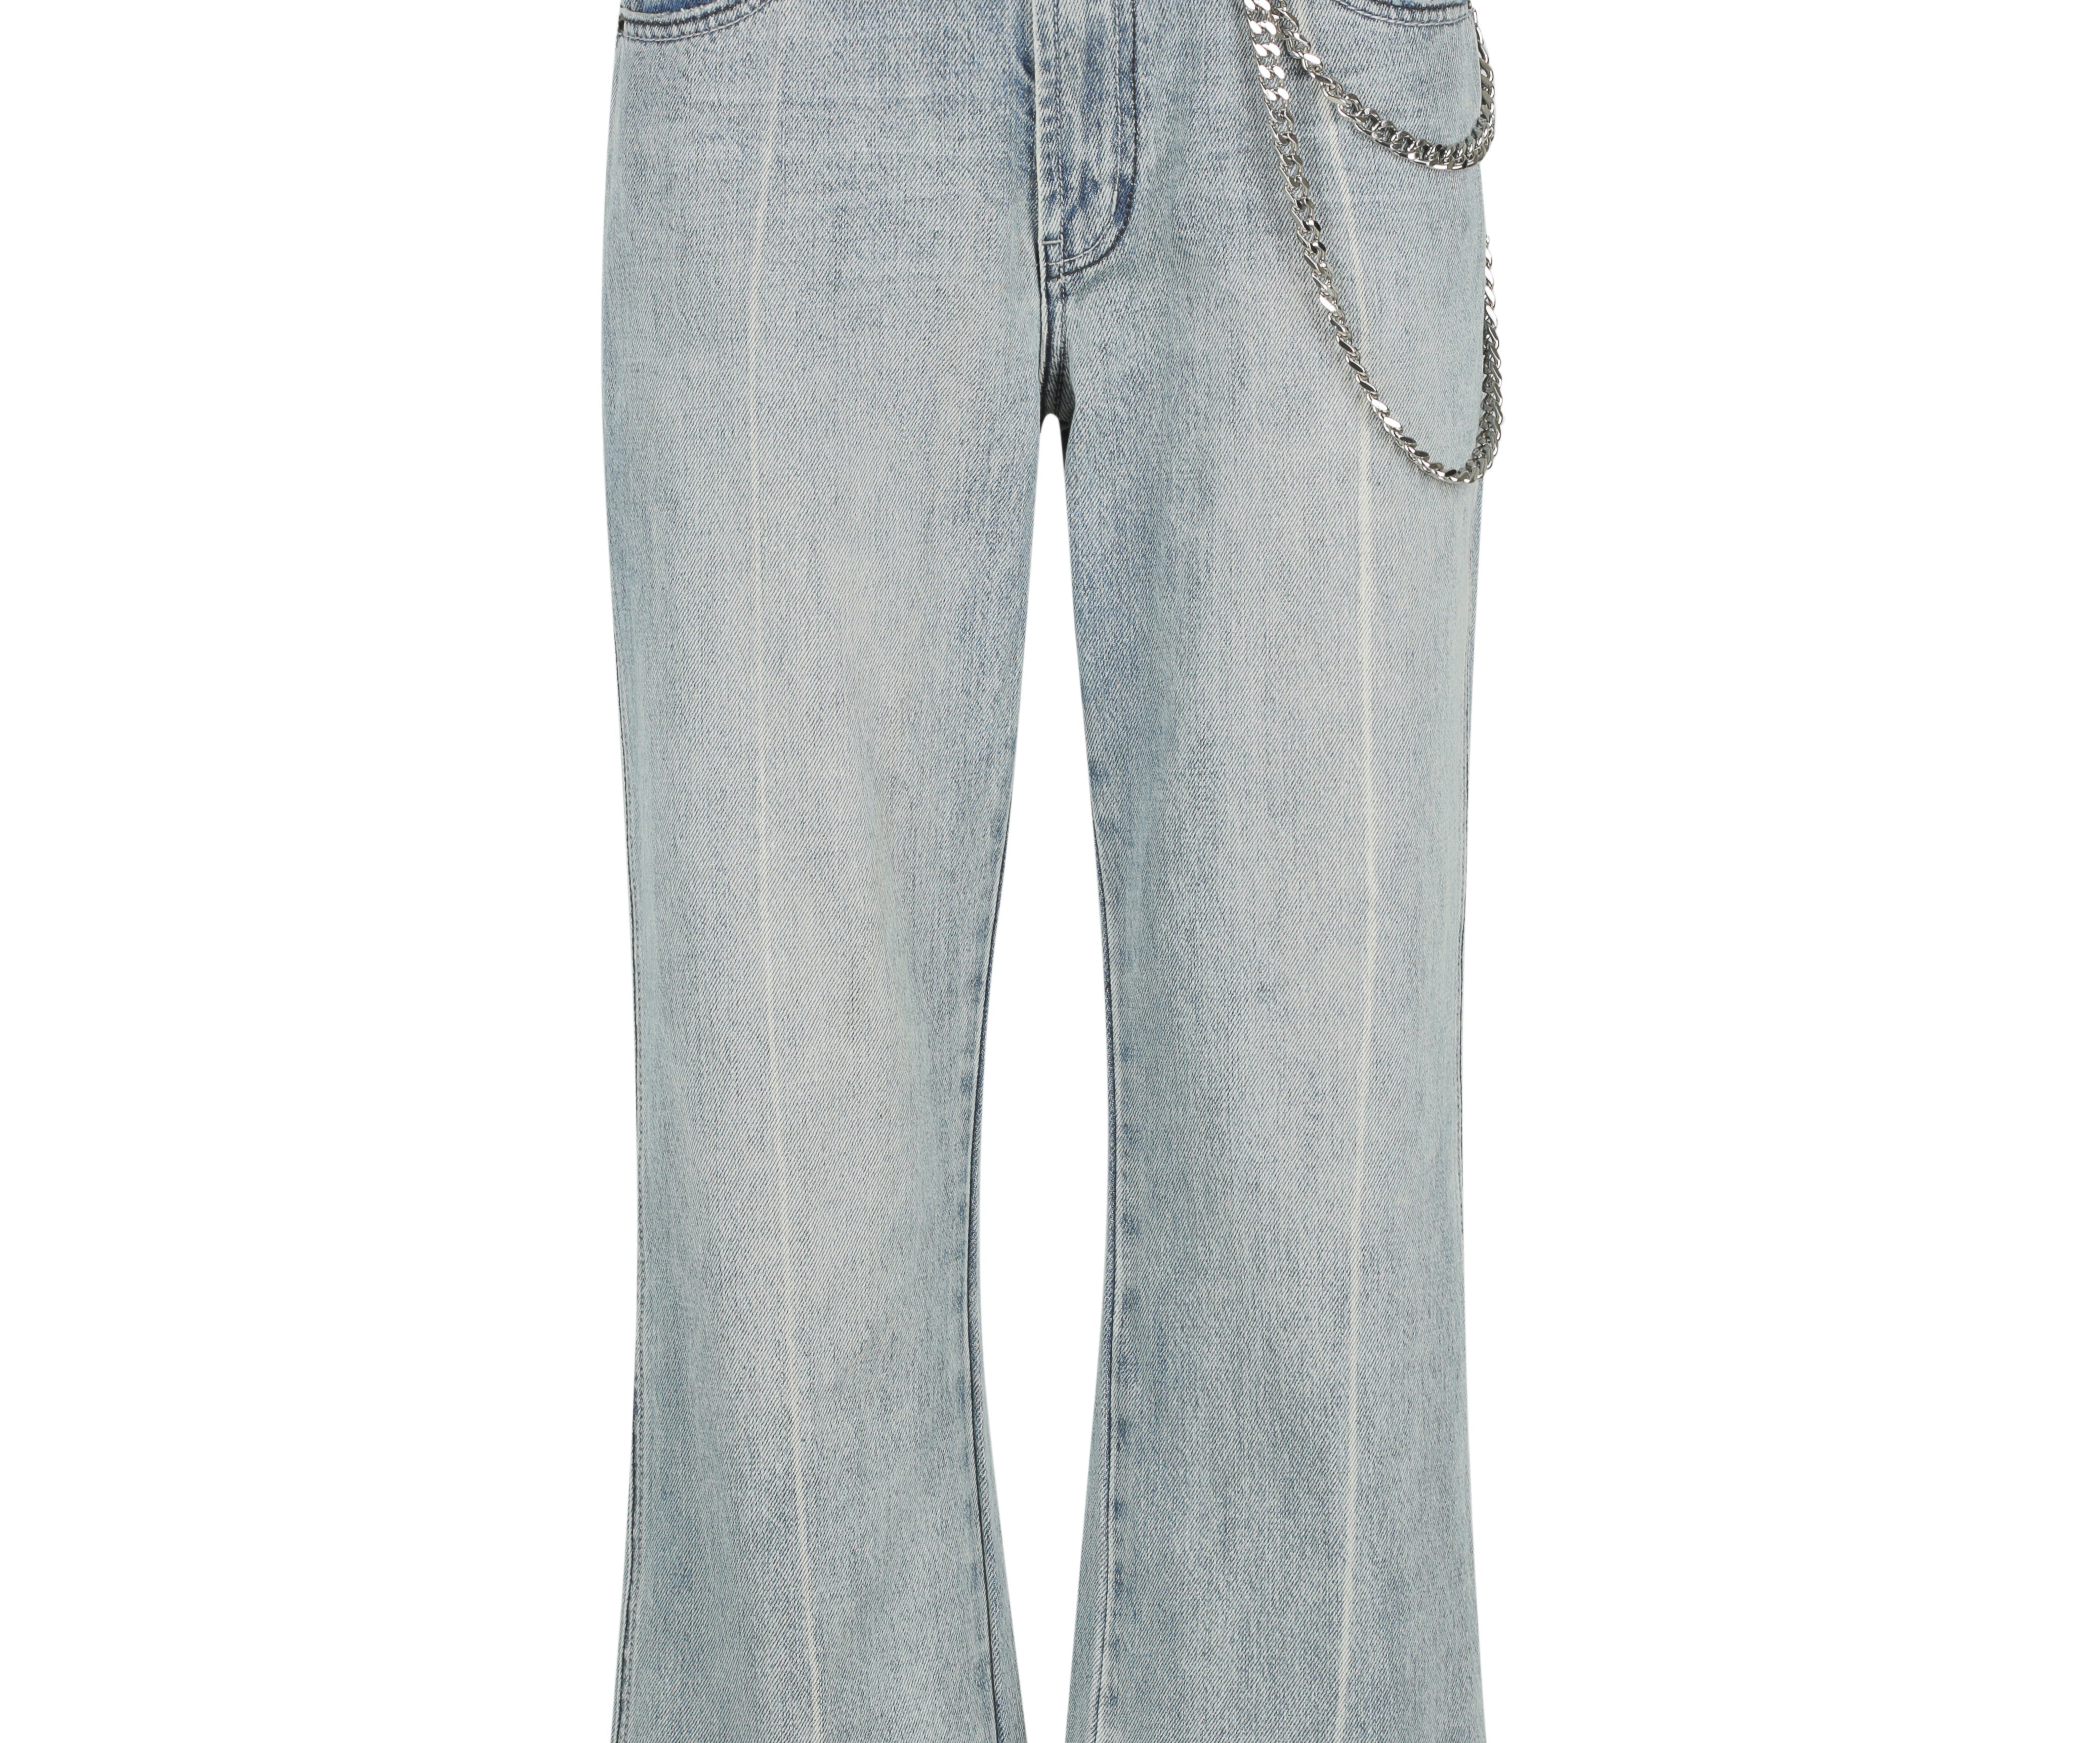 SALTY DOG CHAINED NOMAD MID WAIST VINTAGE FIT JEAN